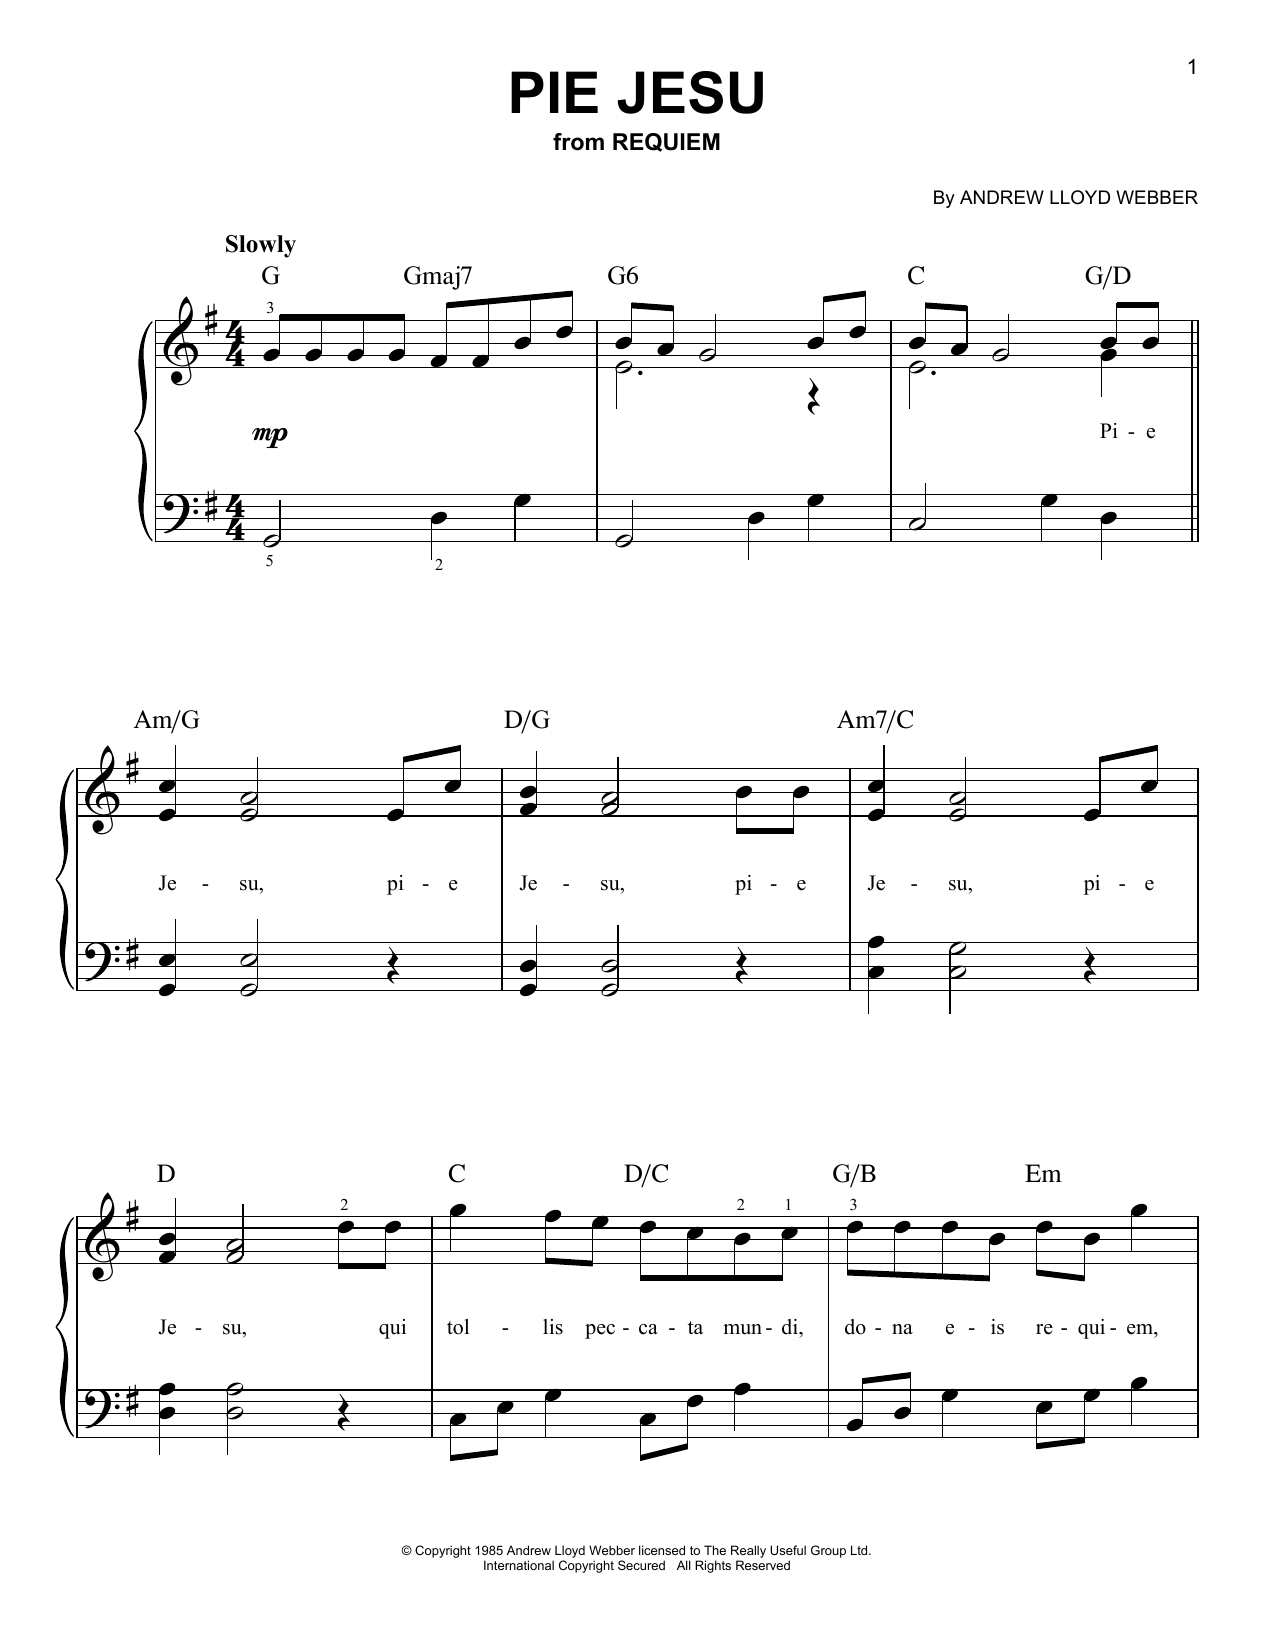 Andrew Lloyd Webber Pie Jesu (from Requiem) sheet music notes and chords. Download Printable PDF.